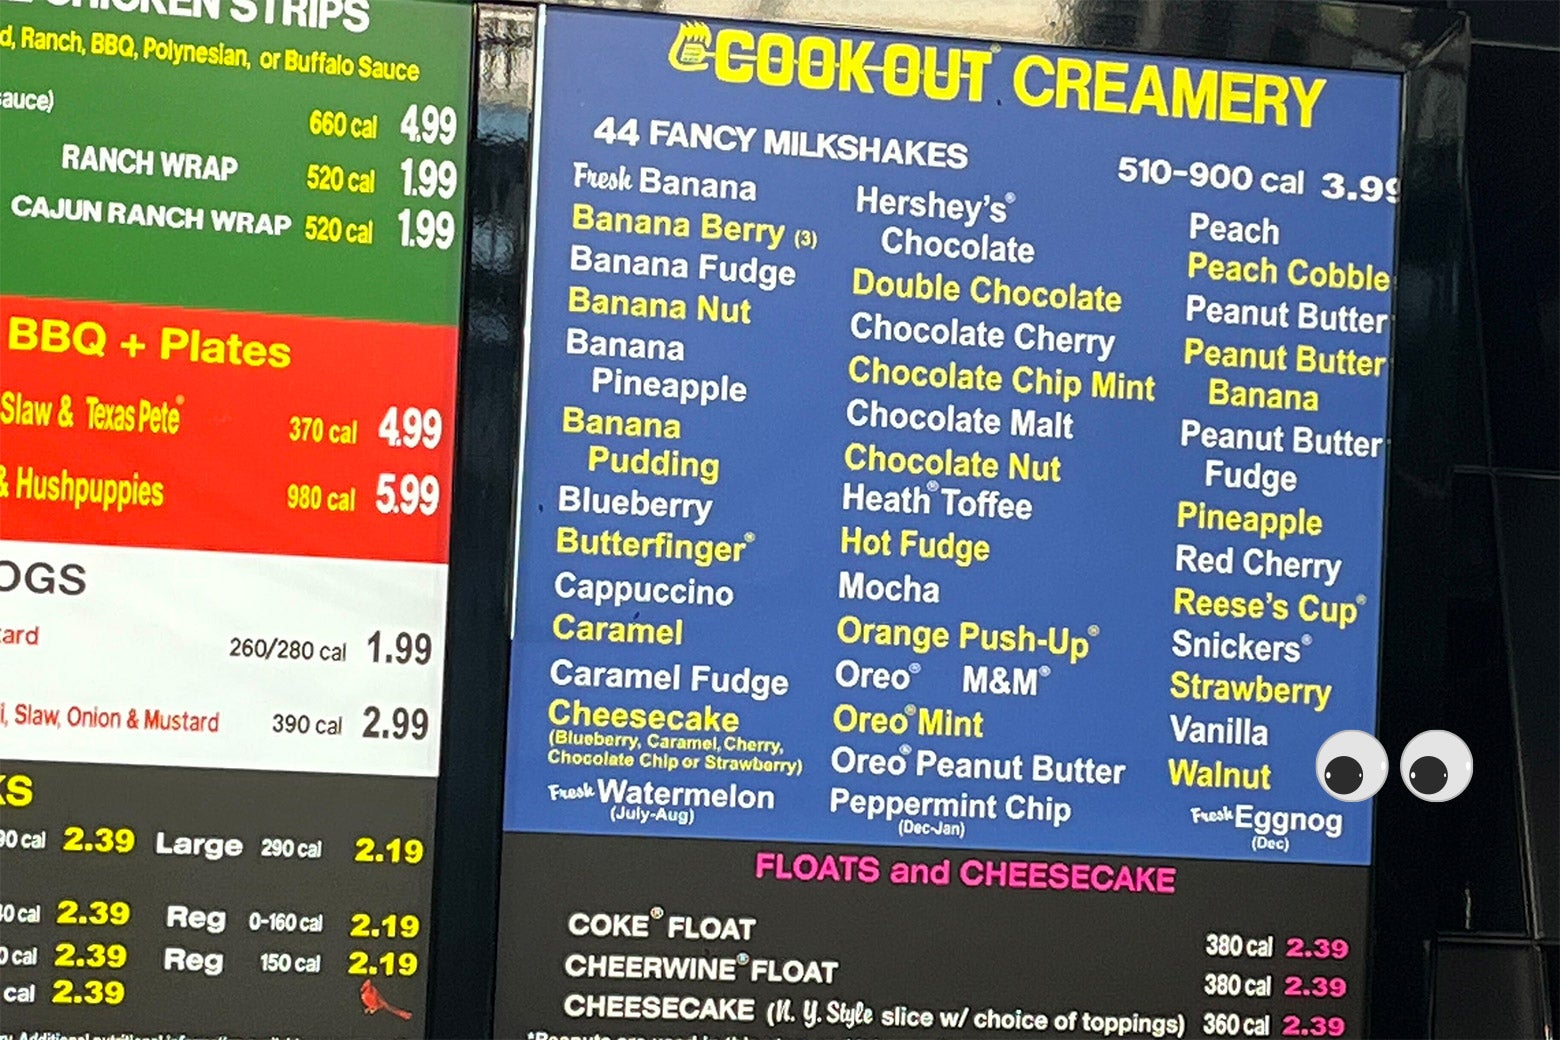 The lengthy milkshake menu at Cook Out, adorned with another set of googly eyes.